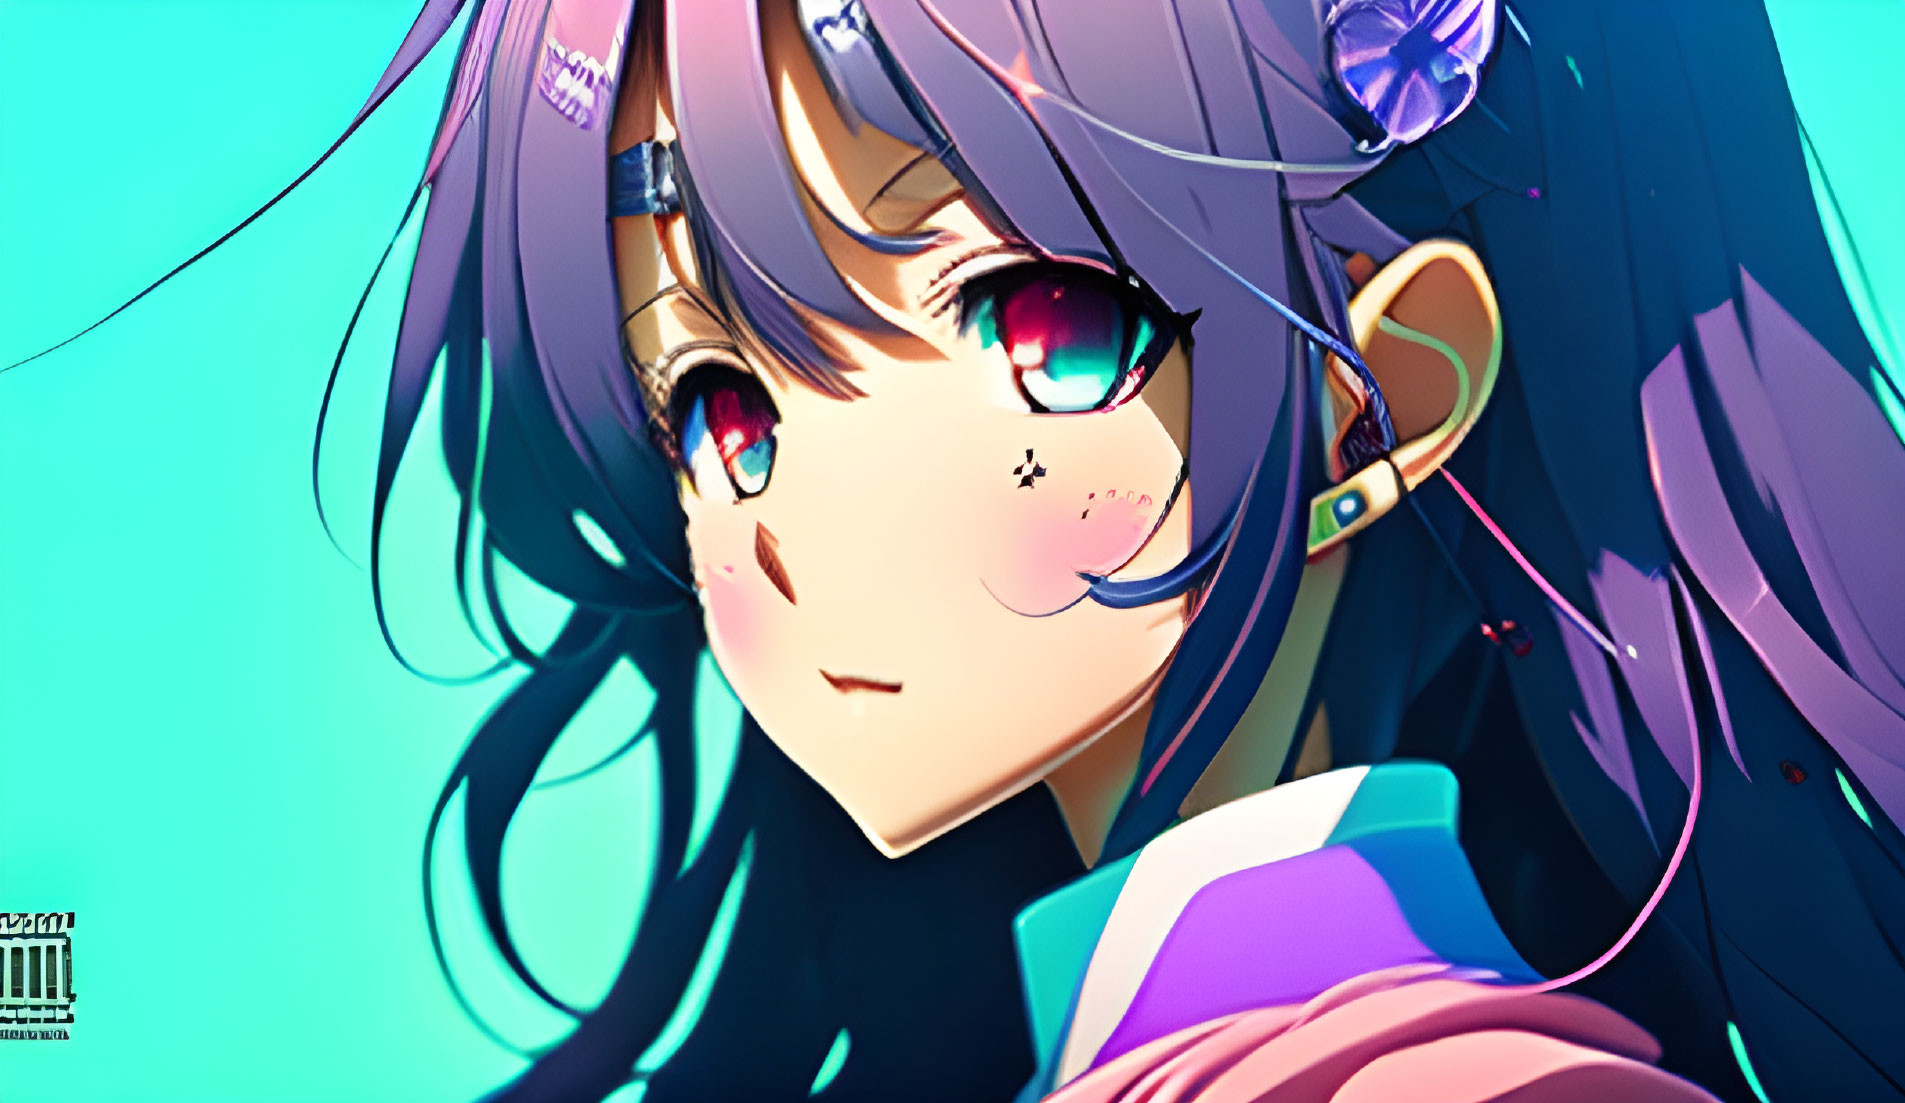 Colorful Anime Girl with Purple Hair and Headphones on Teal Background